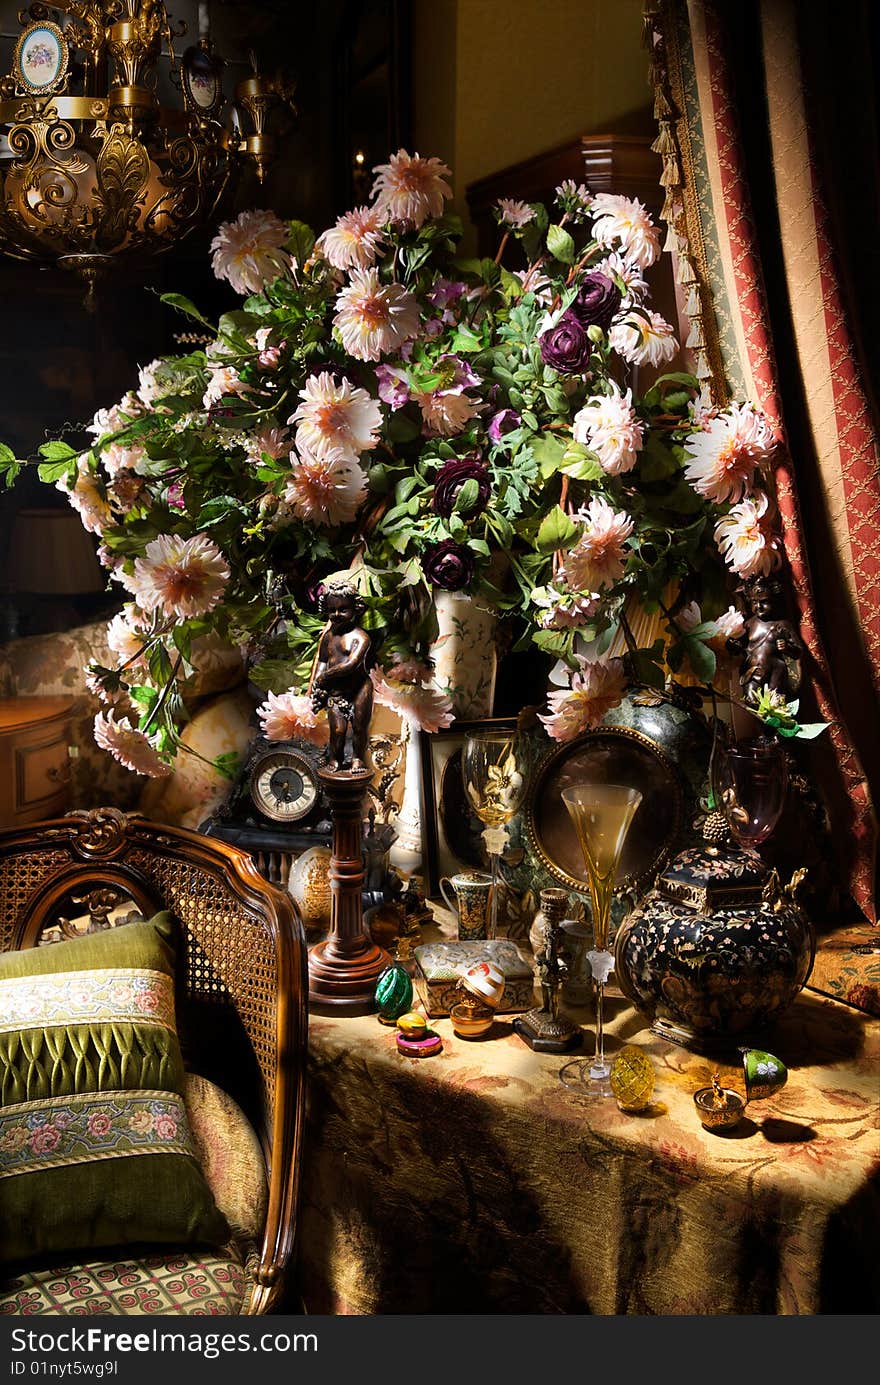 Interior indoors with flowers and objects